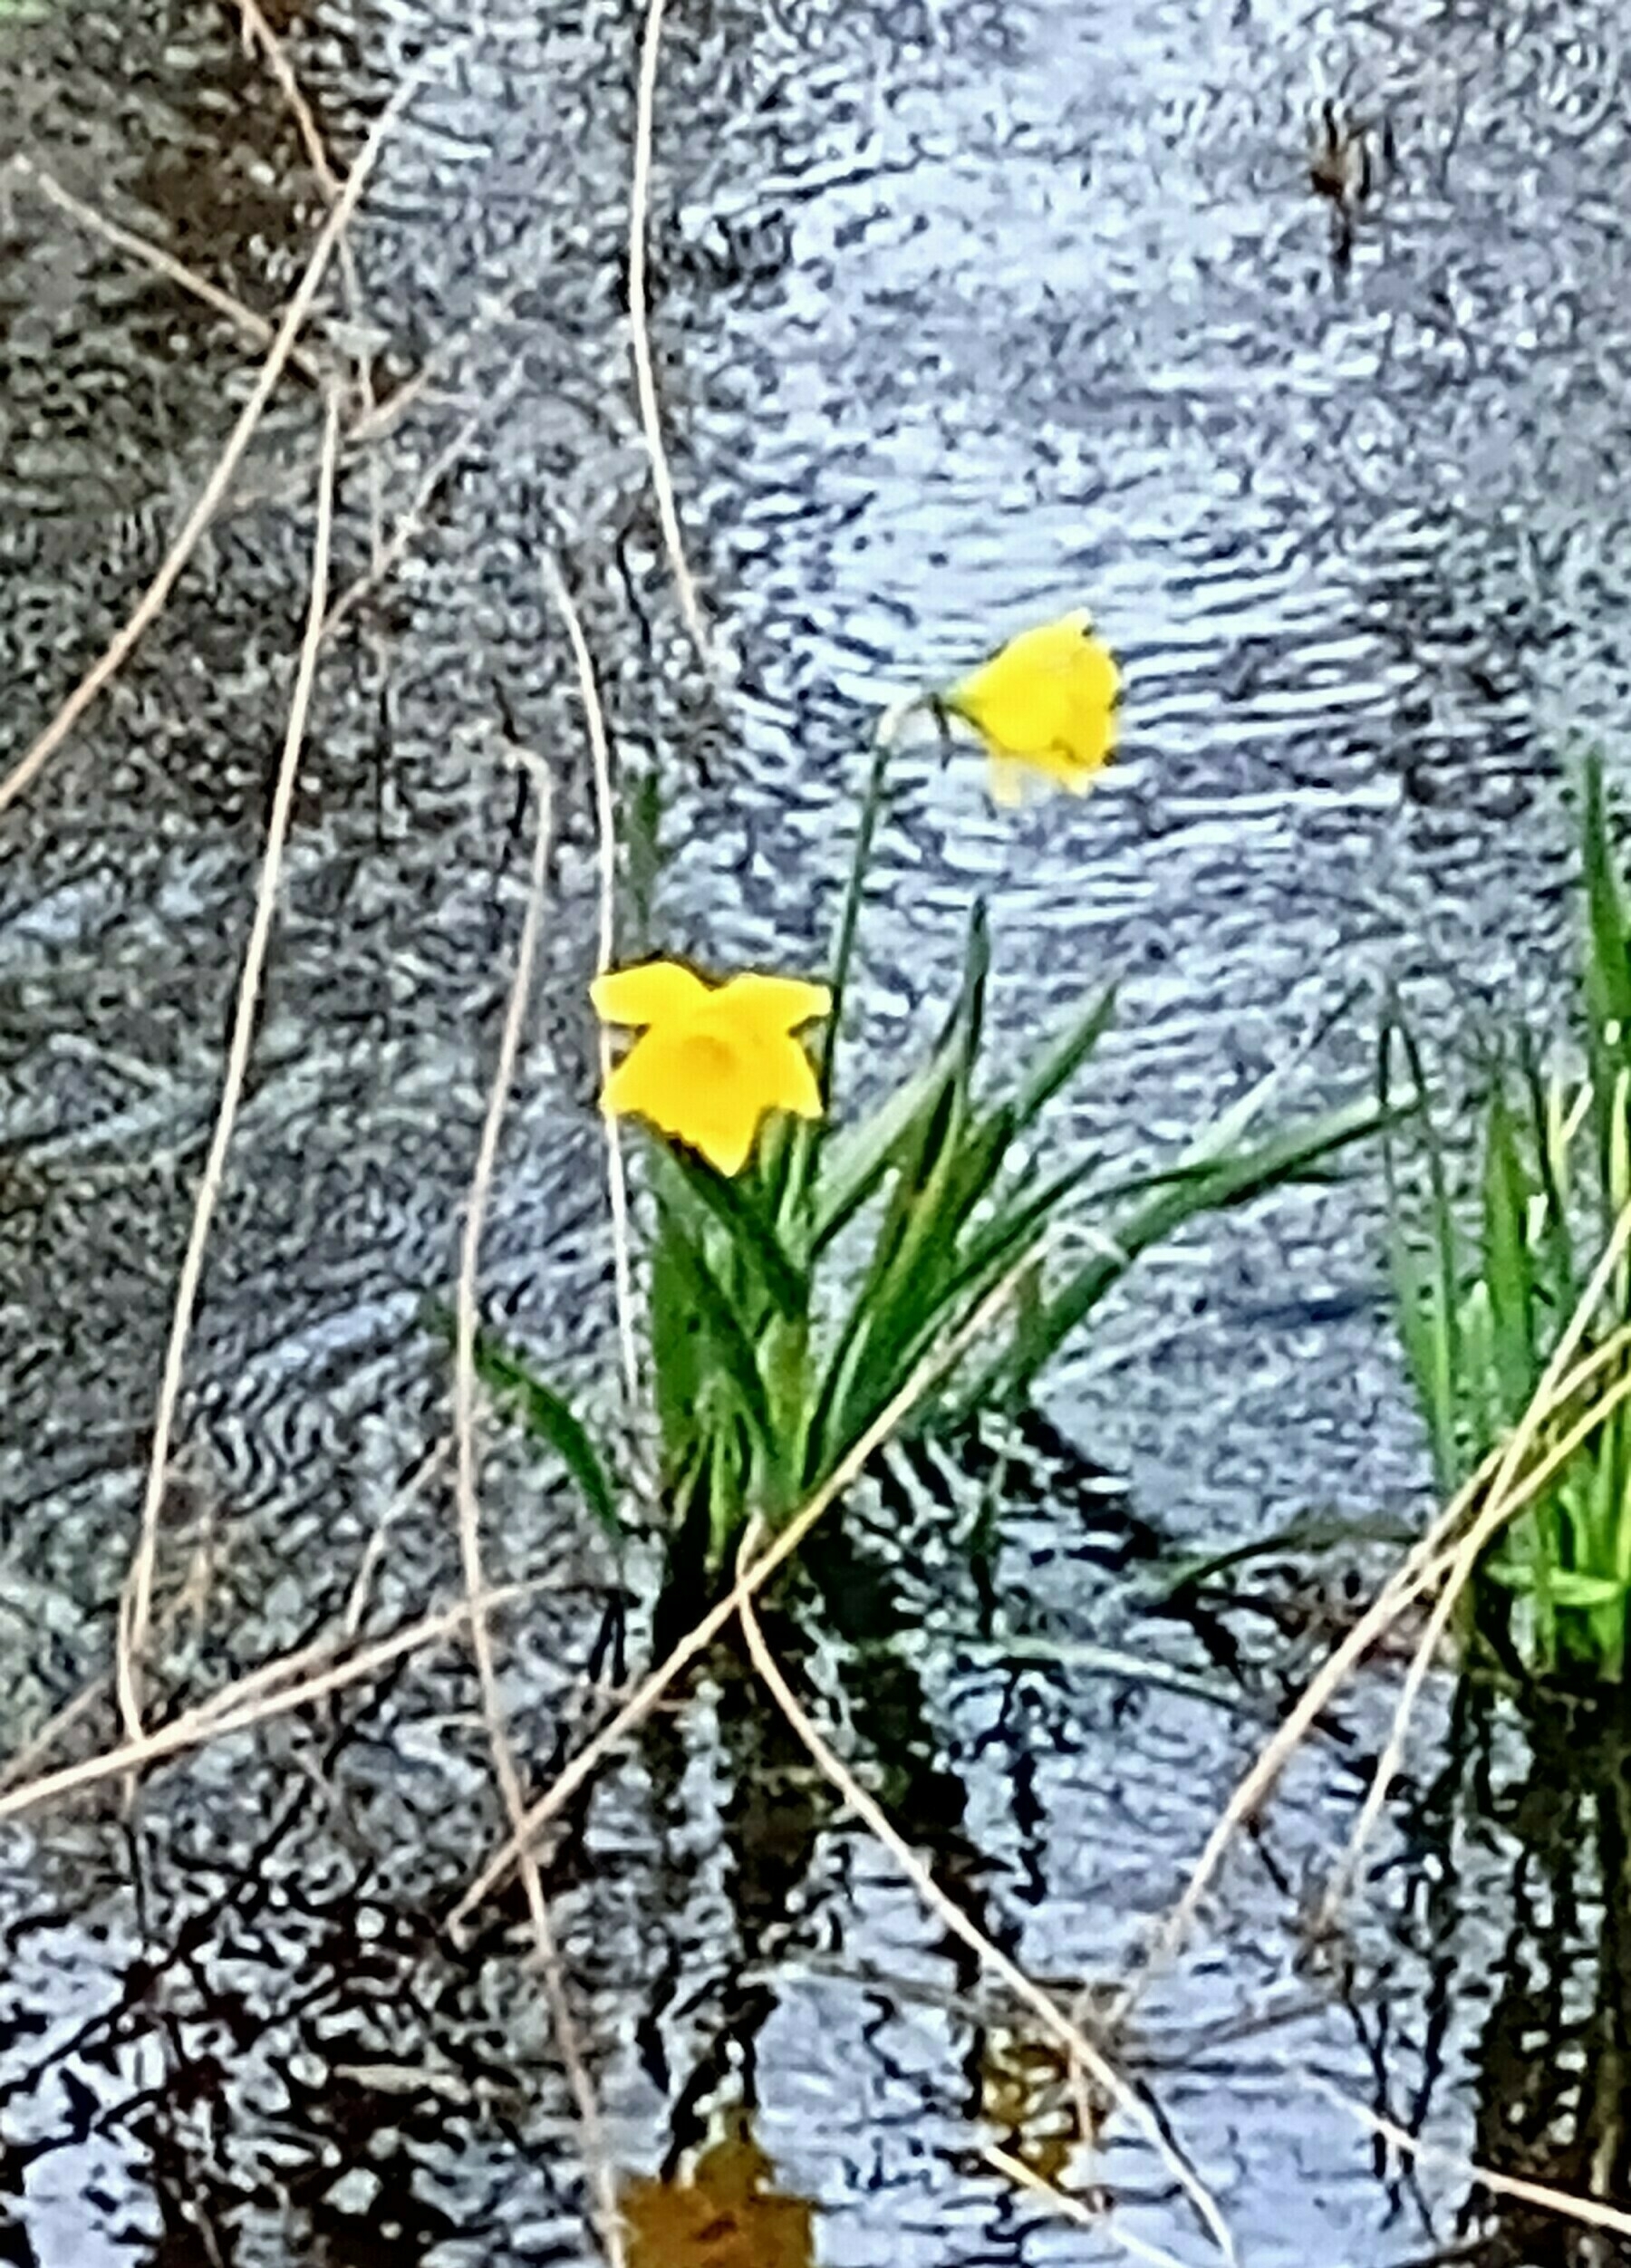 daffodil surrounded by flood water